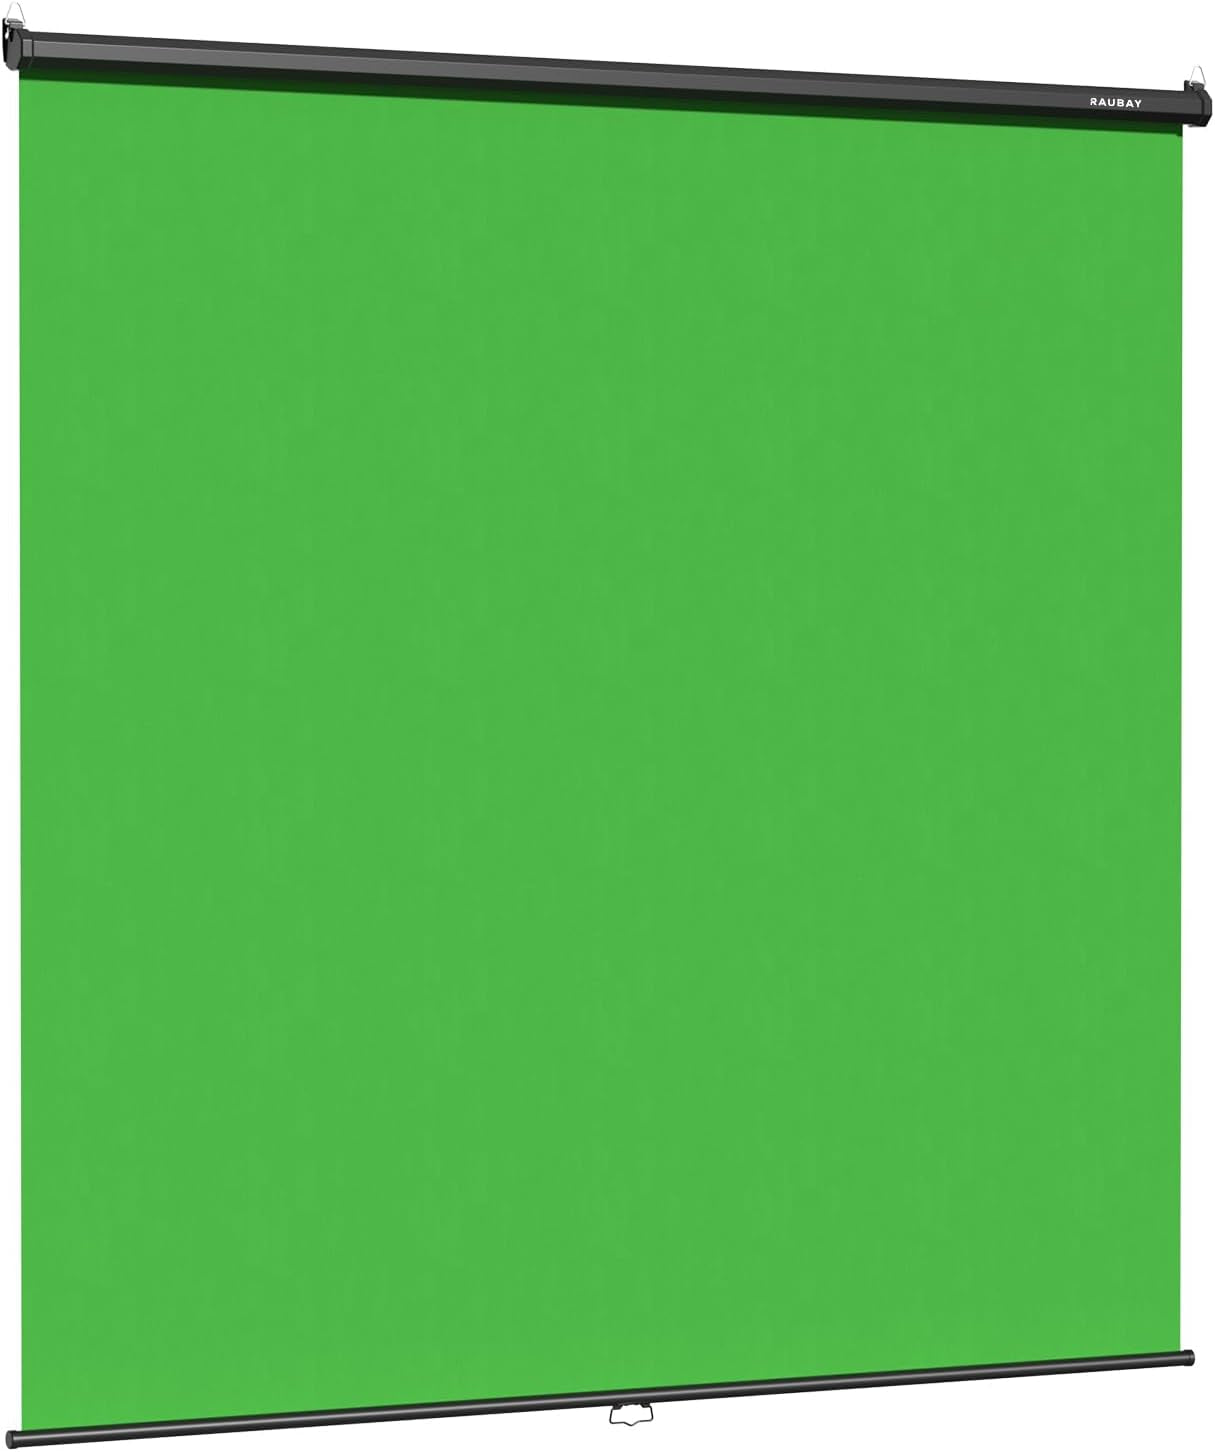 Retractable Pull down Green Screen - 78.7"X 86.6" Collapsible Wall-Mount Background for Professional Video Production, Chroma Key Backdrop for Youtube, Tiktok, Streaming, Video Conferencing